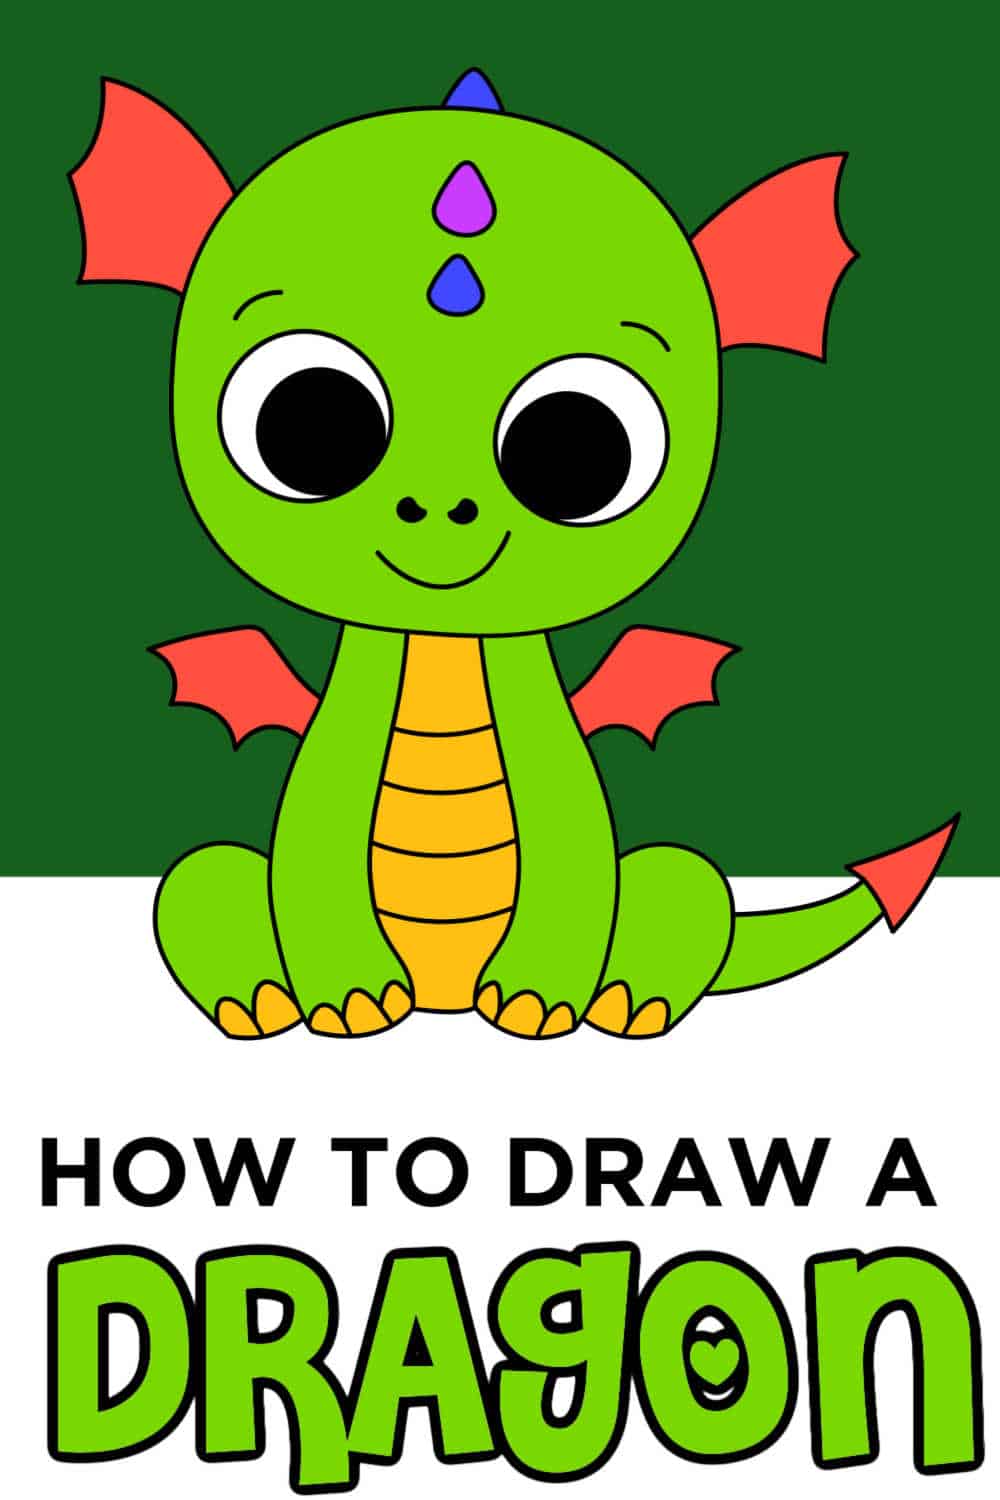 HOW TO DRAW A CARTOON DONUT : EASY DRAWING FOR KIDS - YouTube